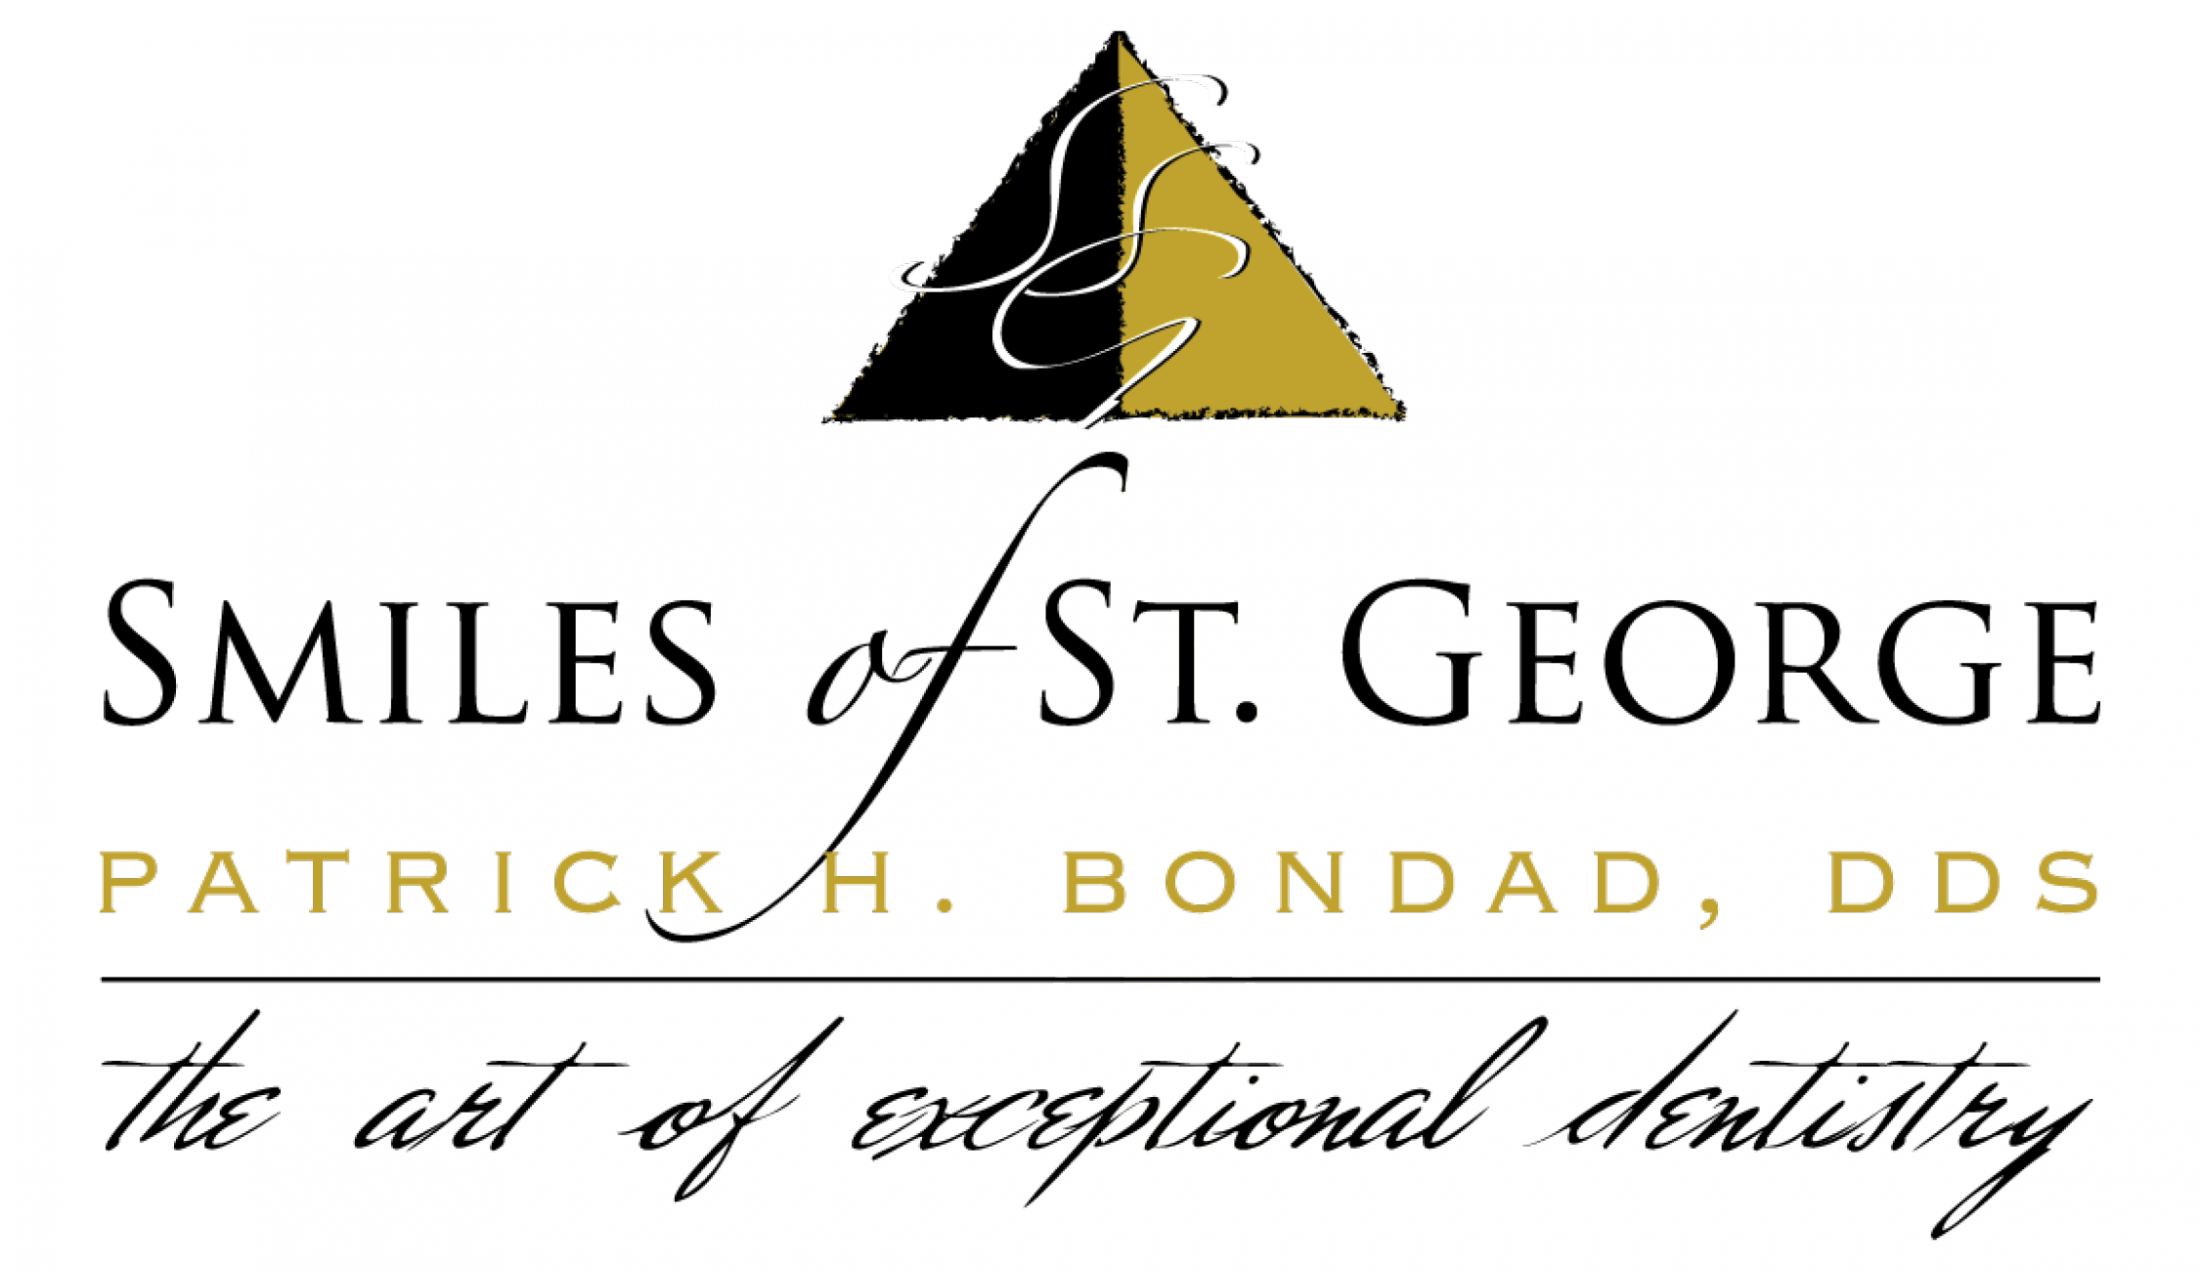 Link to Smiles of St George home page